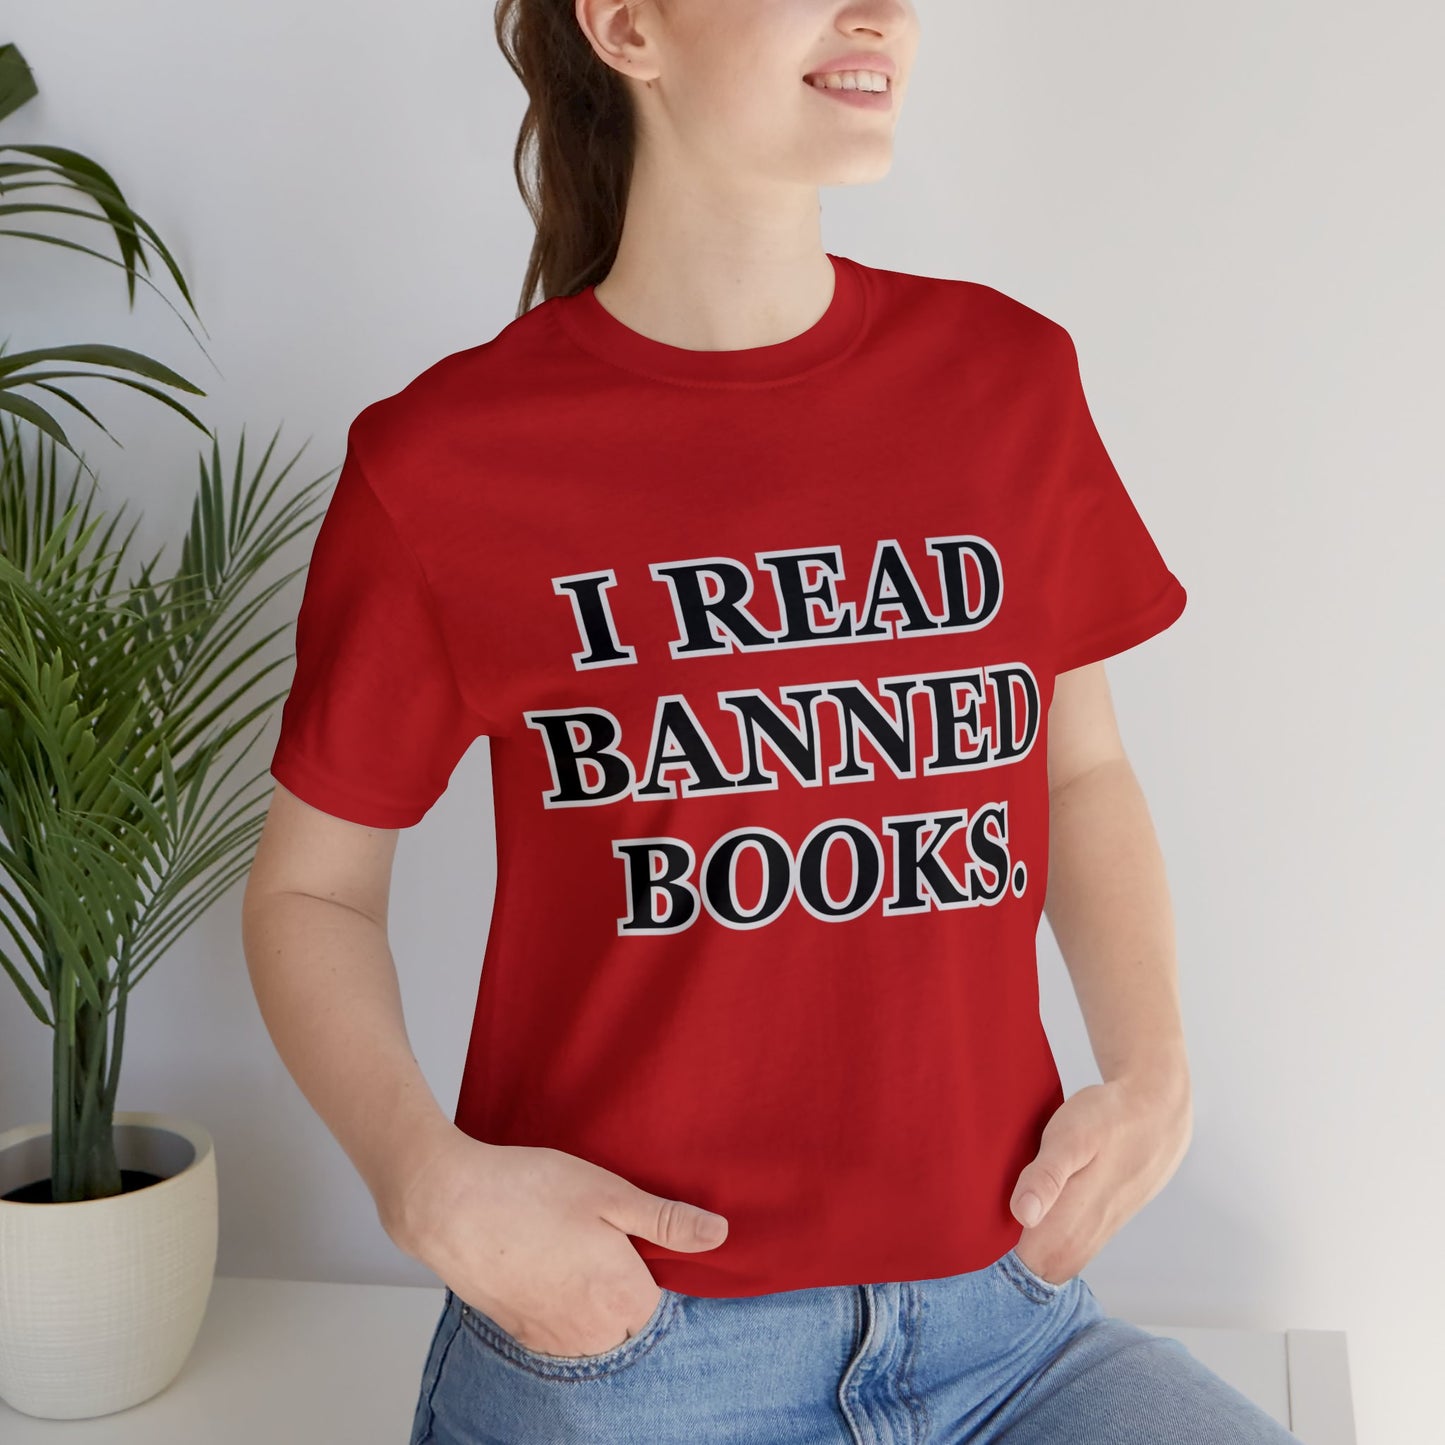 Reading, I Read Banned Books, Things, Books- Adult, Regular Fit, Soft Cotton, Full Size Image T-Shirt